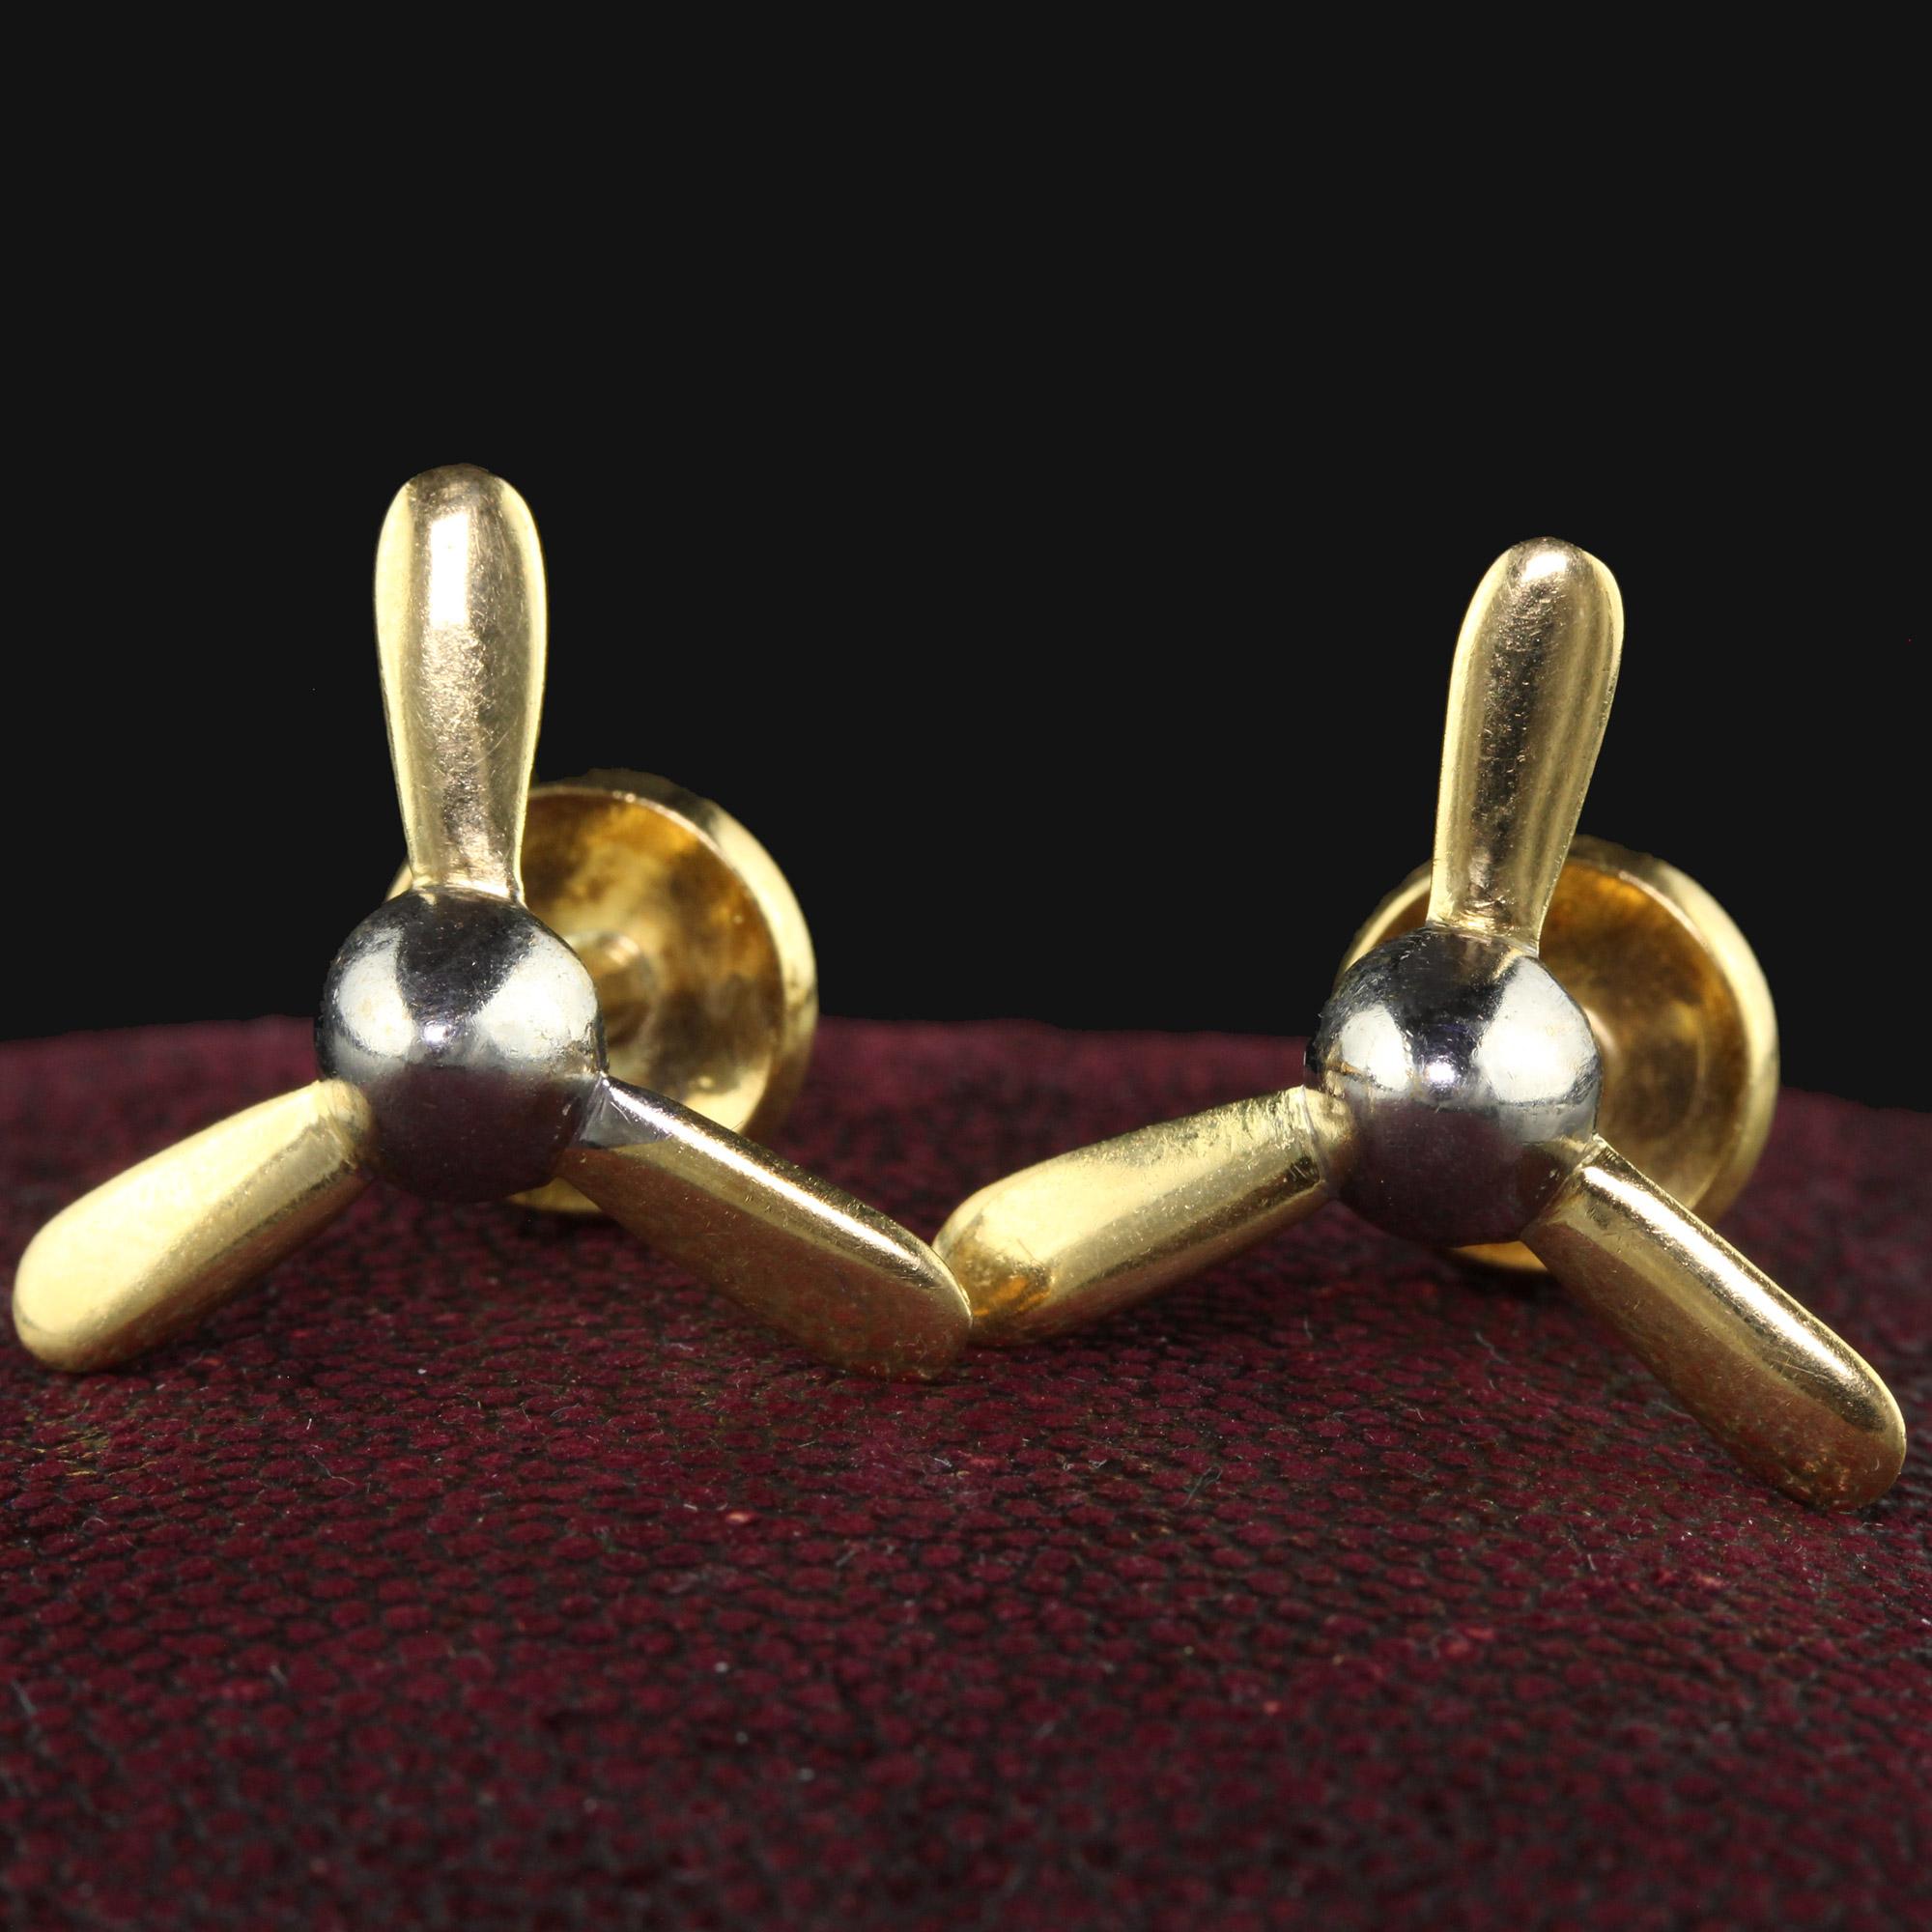 Beautiful Vintage Retro 18K Gold and Platinum Propeller Cufflinks. This incredible pair of propeller cufflinks are crafted in 18k yellow gold and platinum. The cufflinks have a nice size to them and are in good condition. The center portion of the